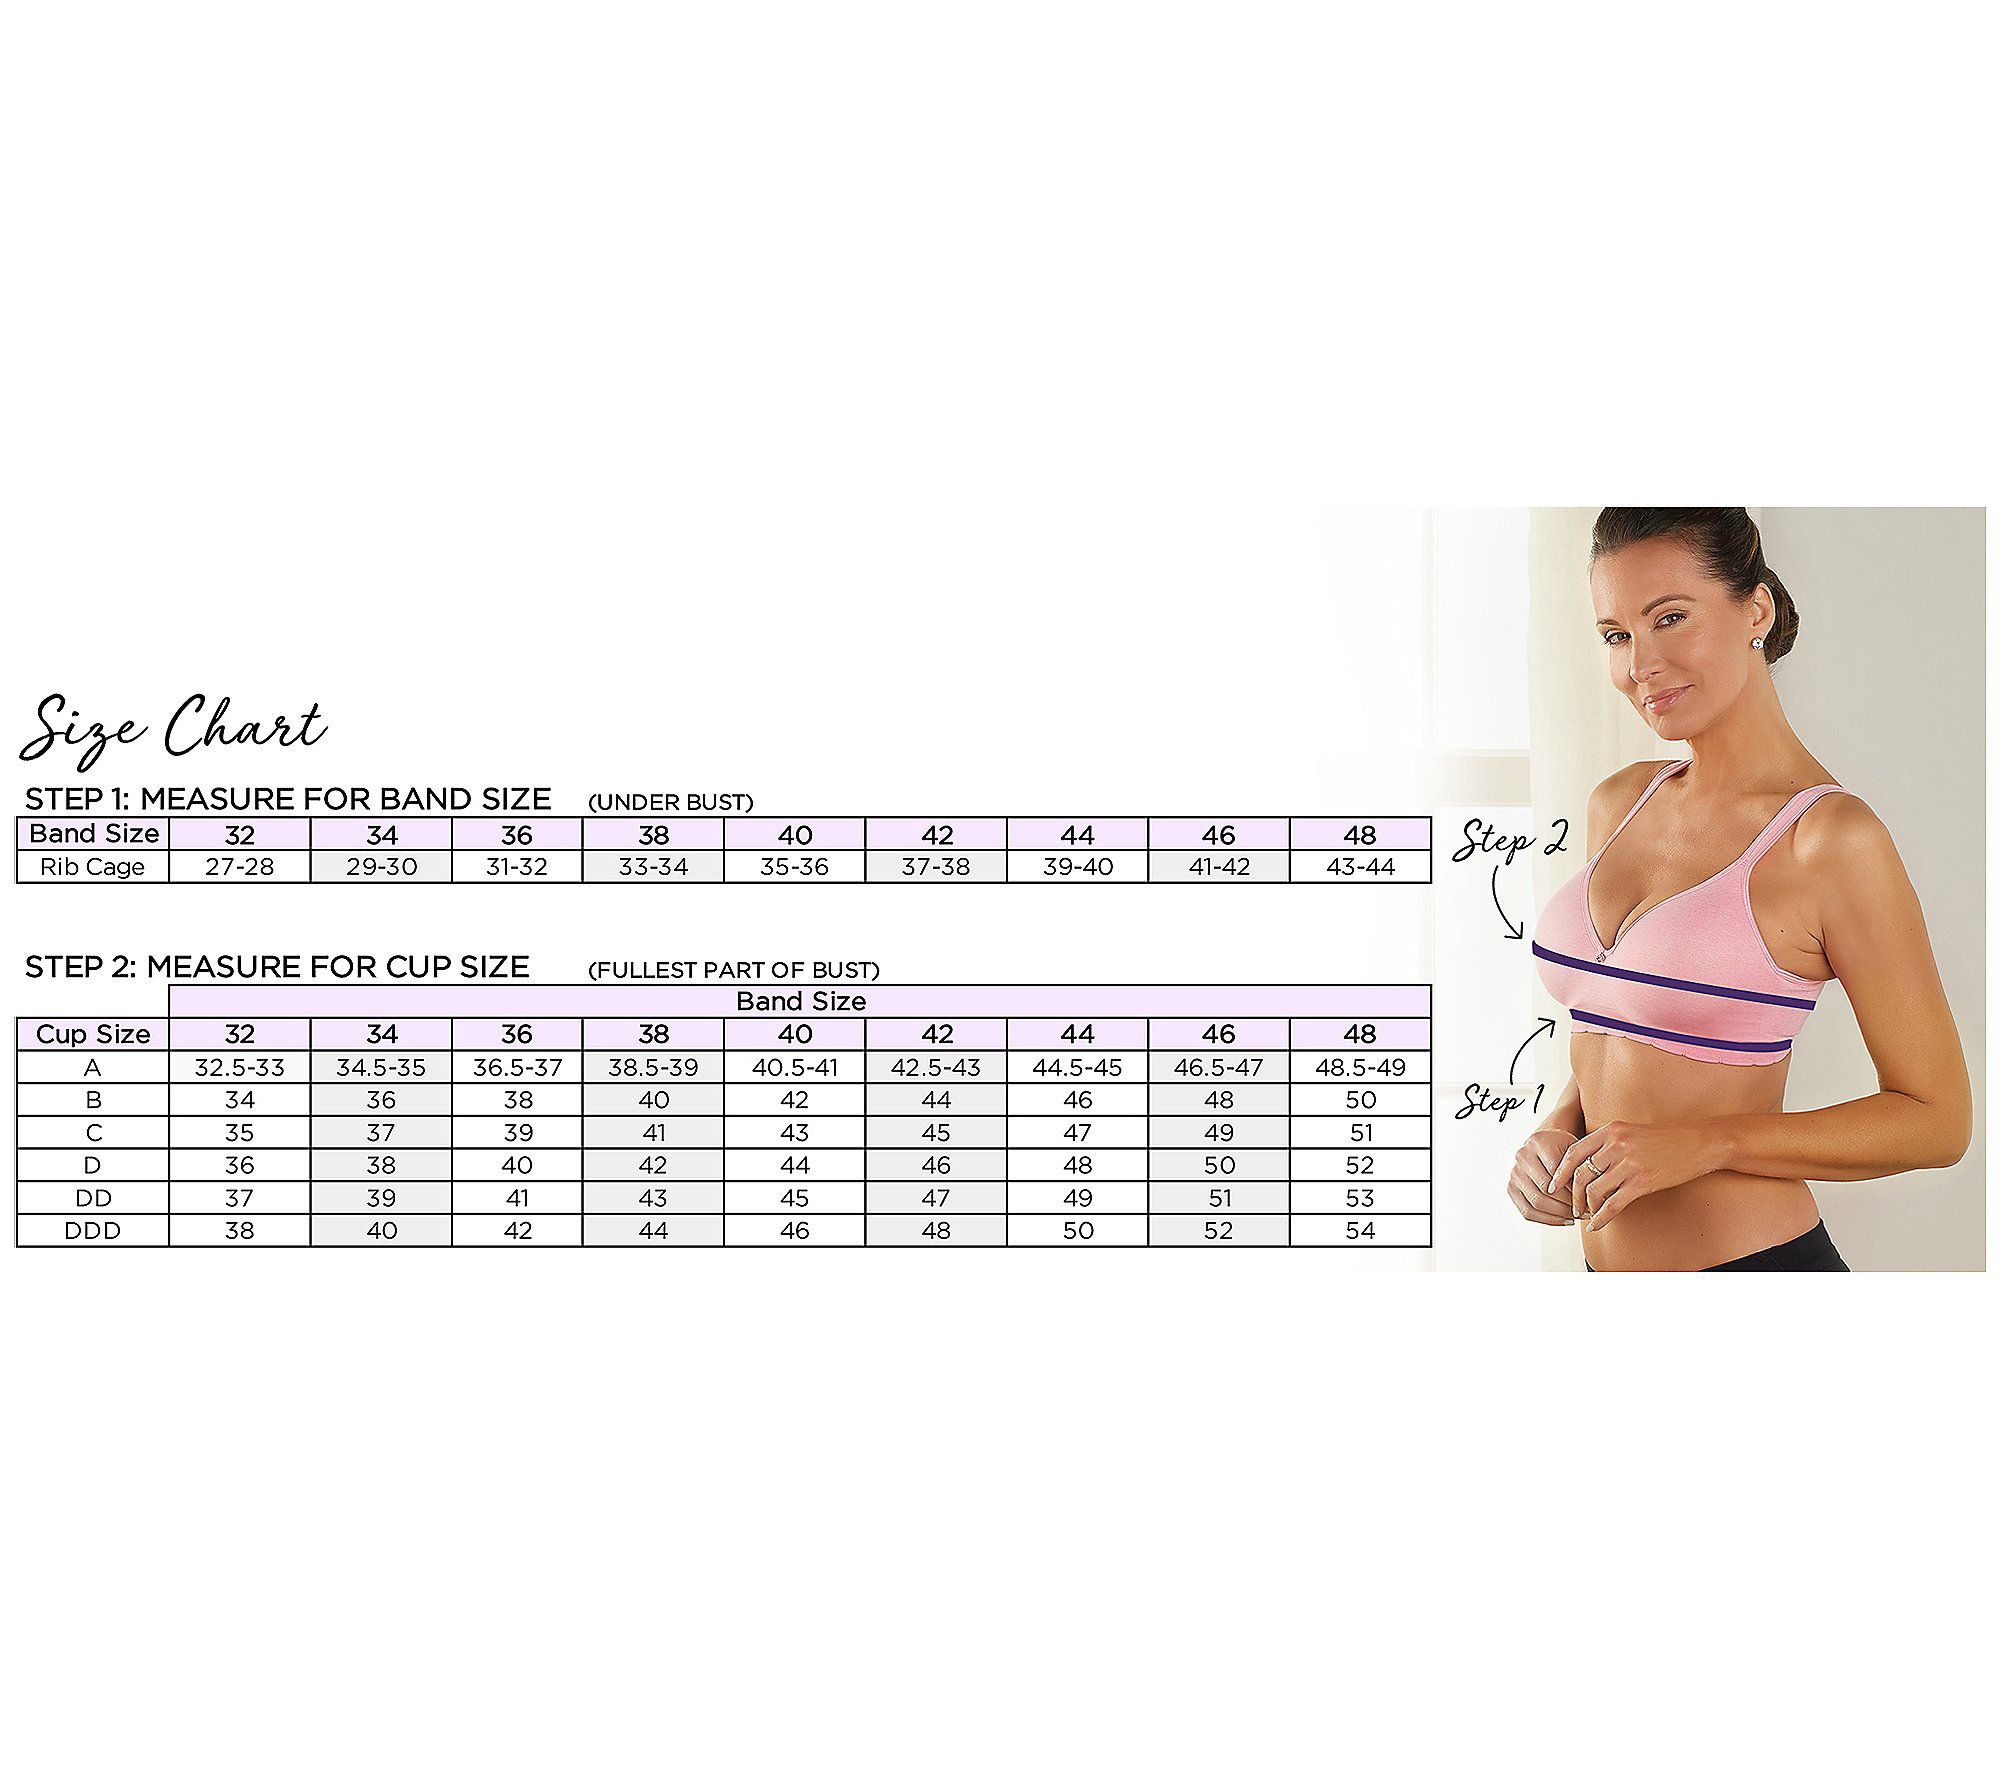 QVC) Breezies Soft Support Wirefree Bra with Contrast Lace Set of